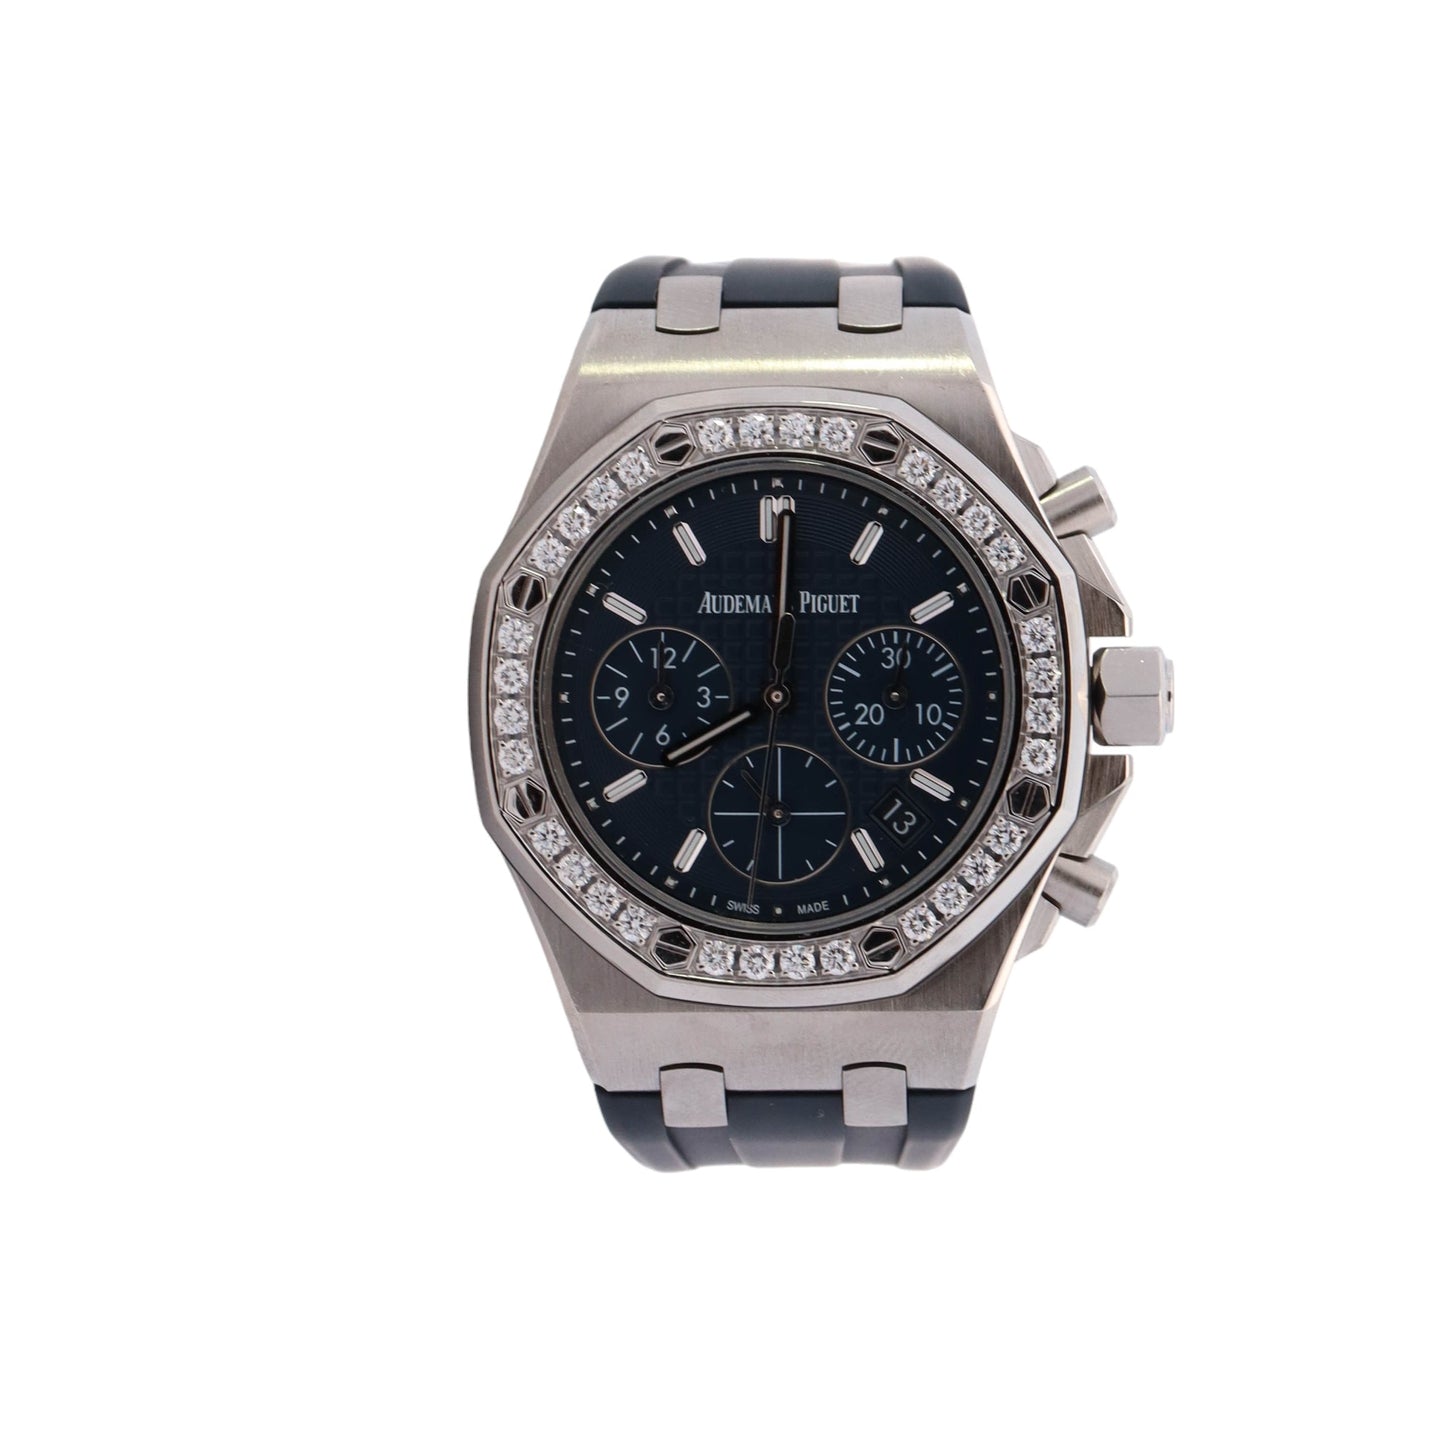 Audemars Piguet Royal Oak Offshore 37mm Stainless Steel Blue Chronograph Dial Watch  Reference #: 26231ST.ZZ.D002CA.01 - Happy Jewelers Fine Jewelry Lifetime Warranty